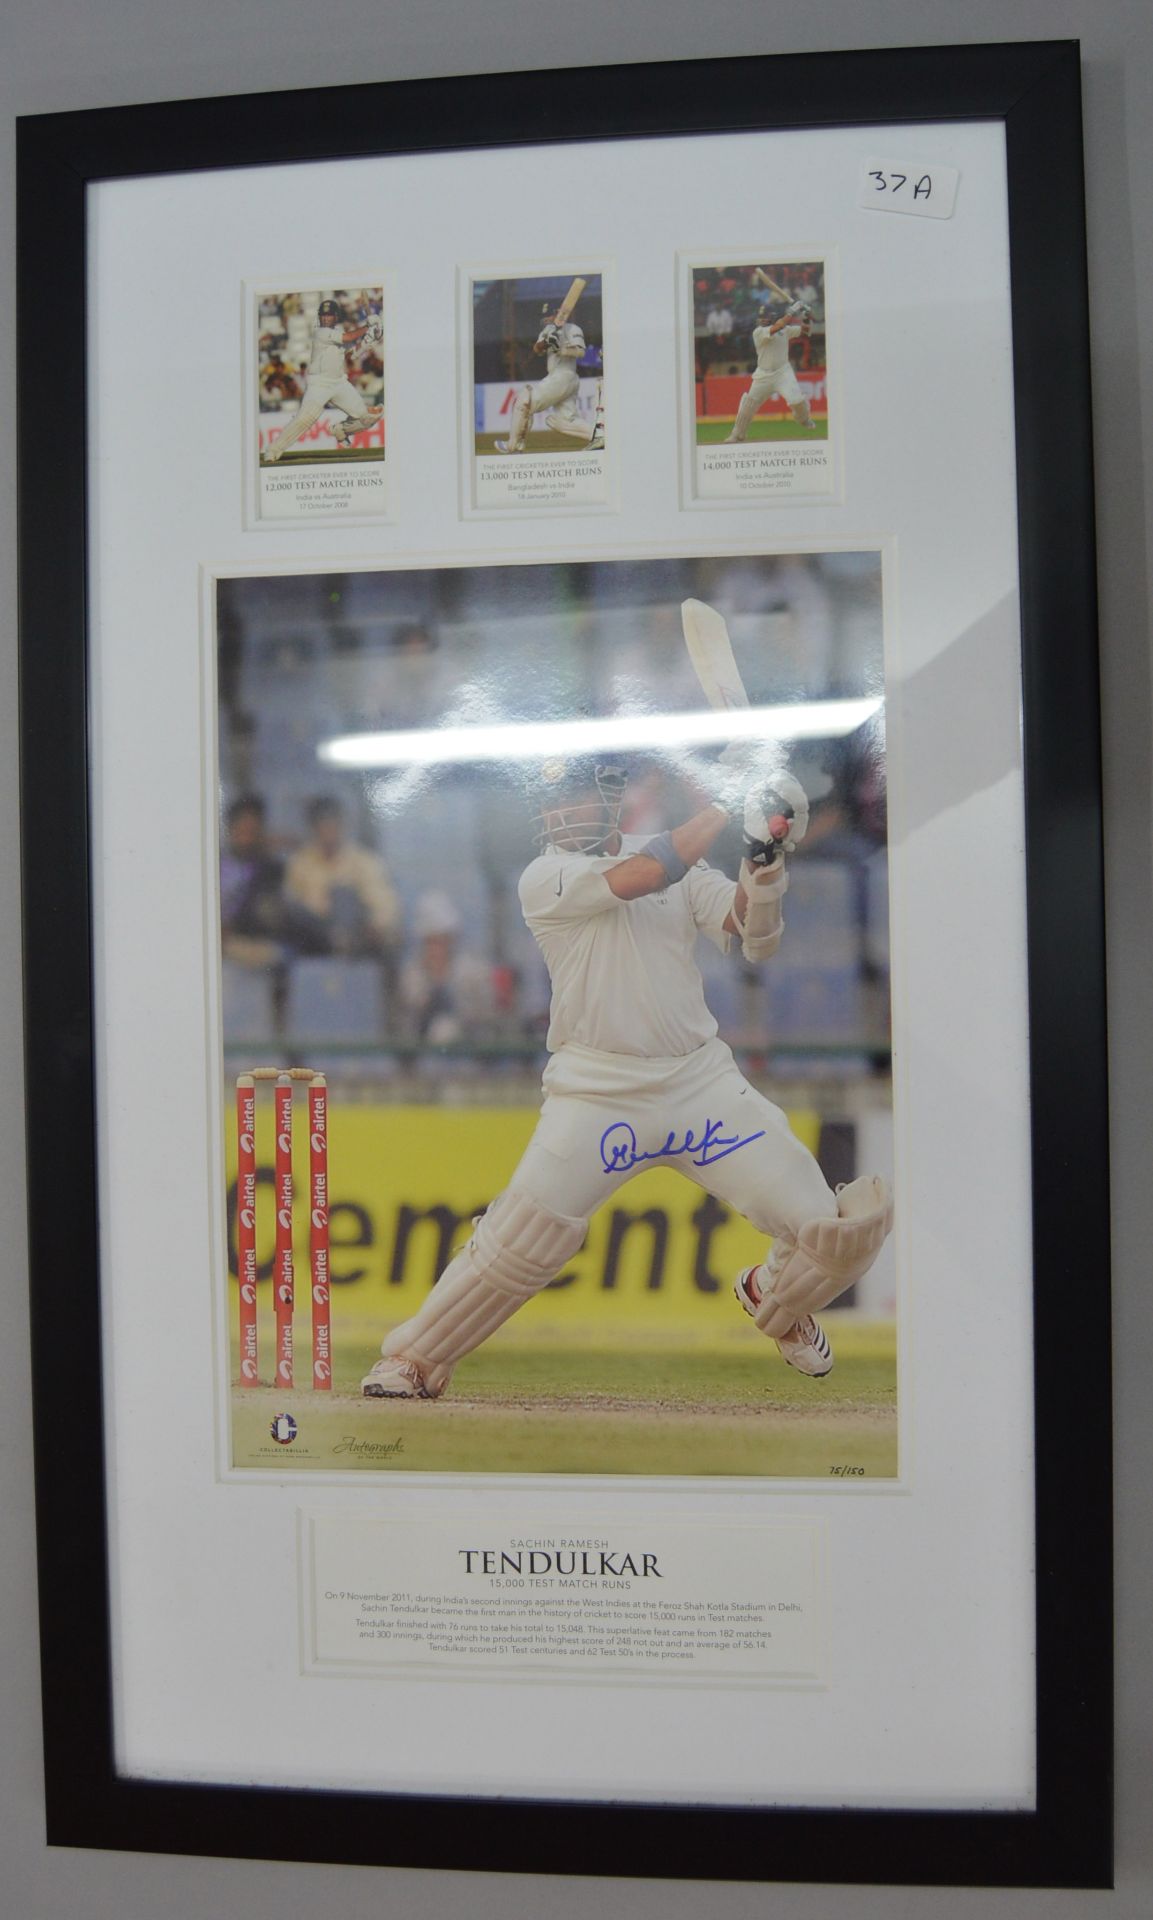 A signed Limited Edition photograph of Sachin Ramesh Tendulkar to commemorate his 15000th test